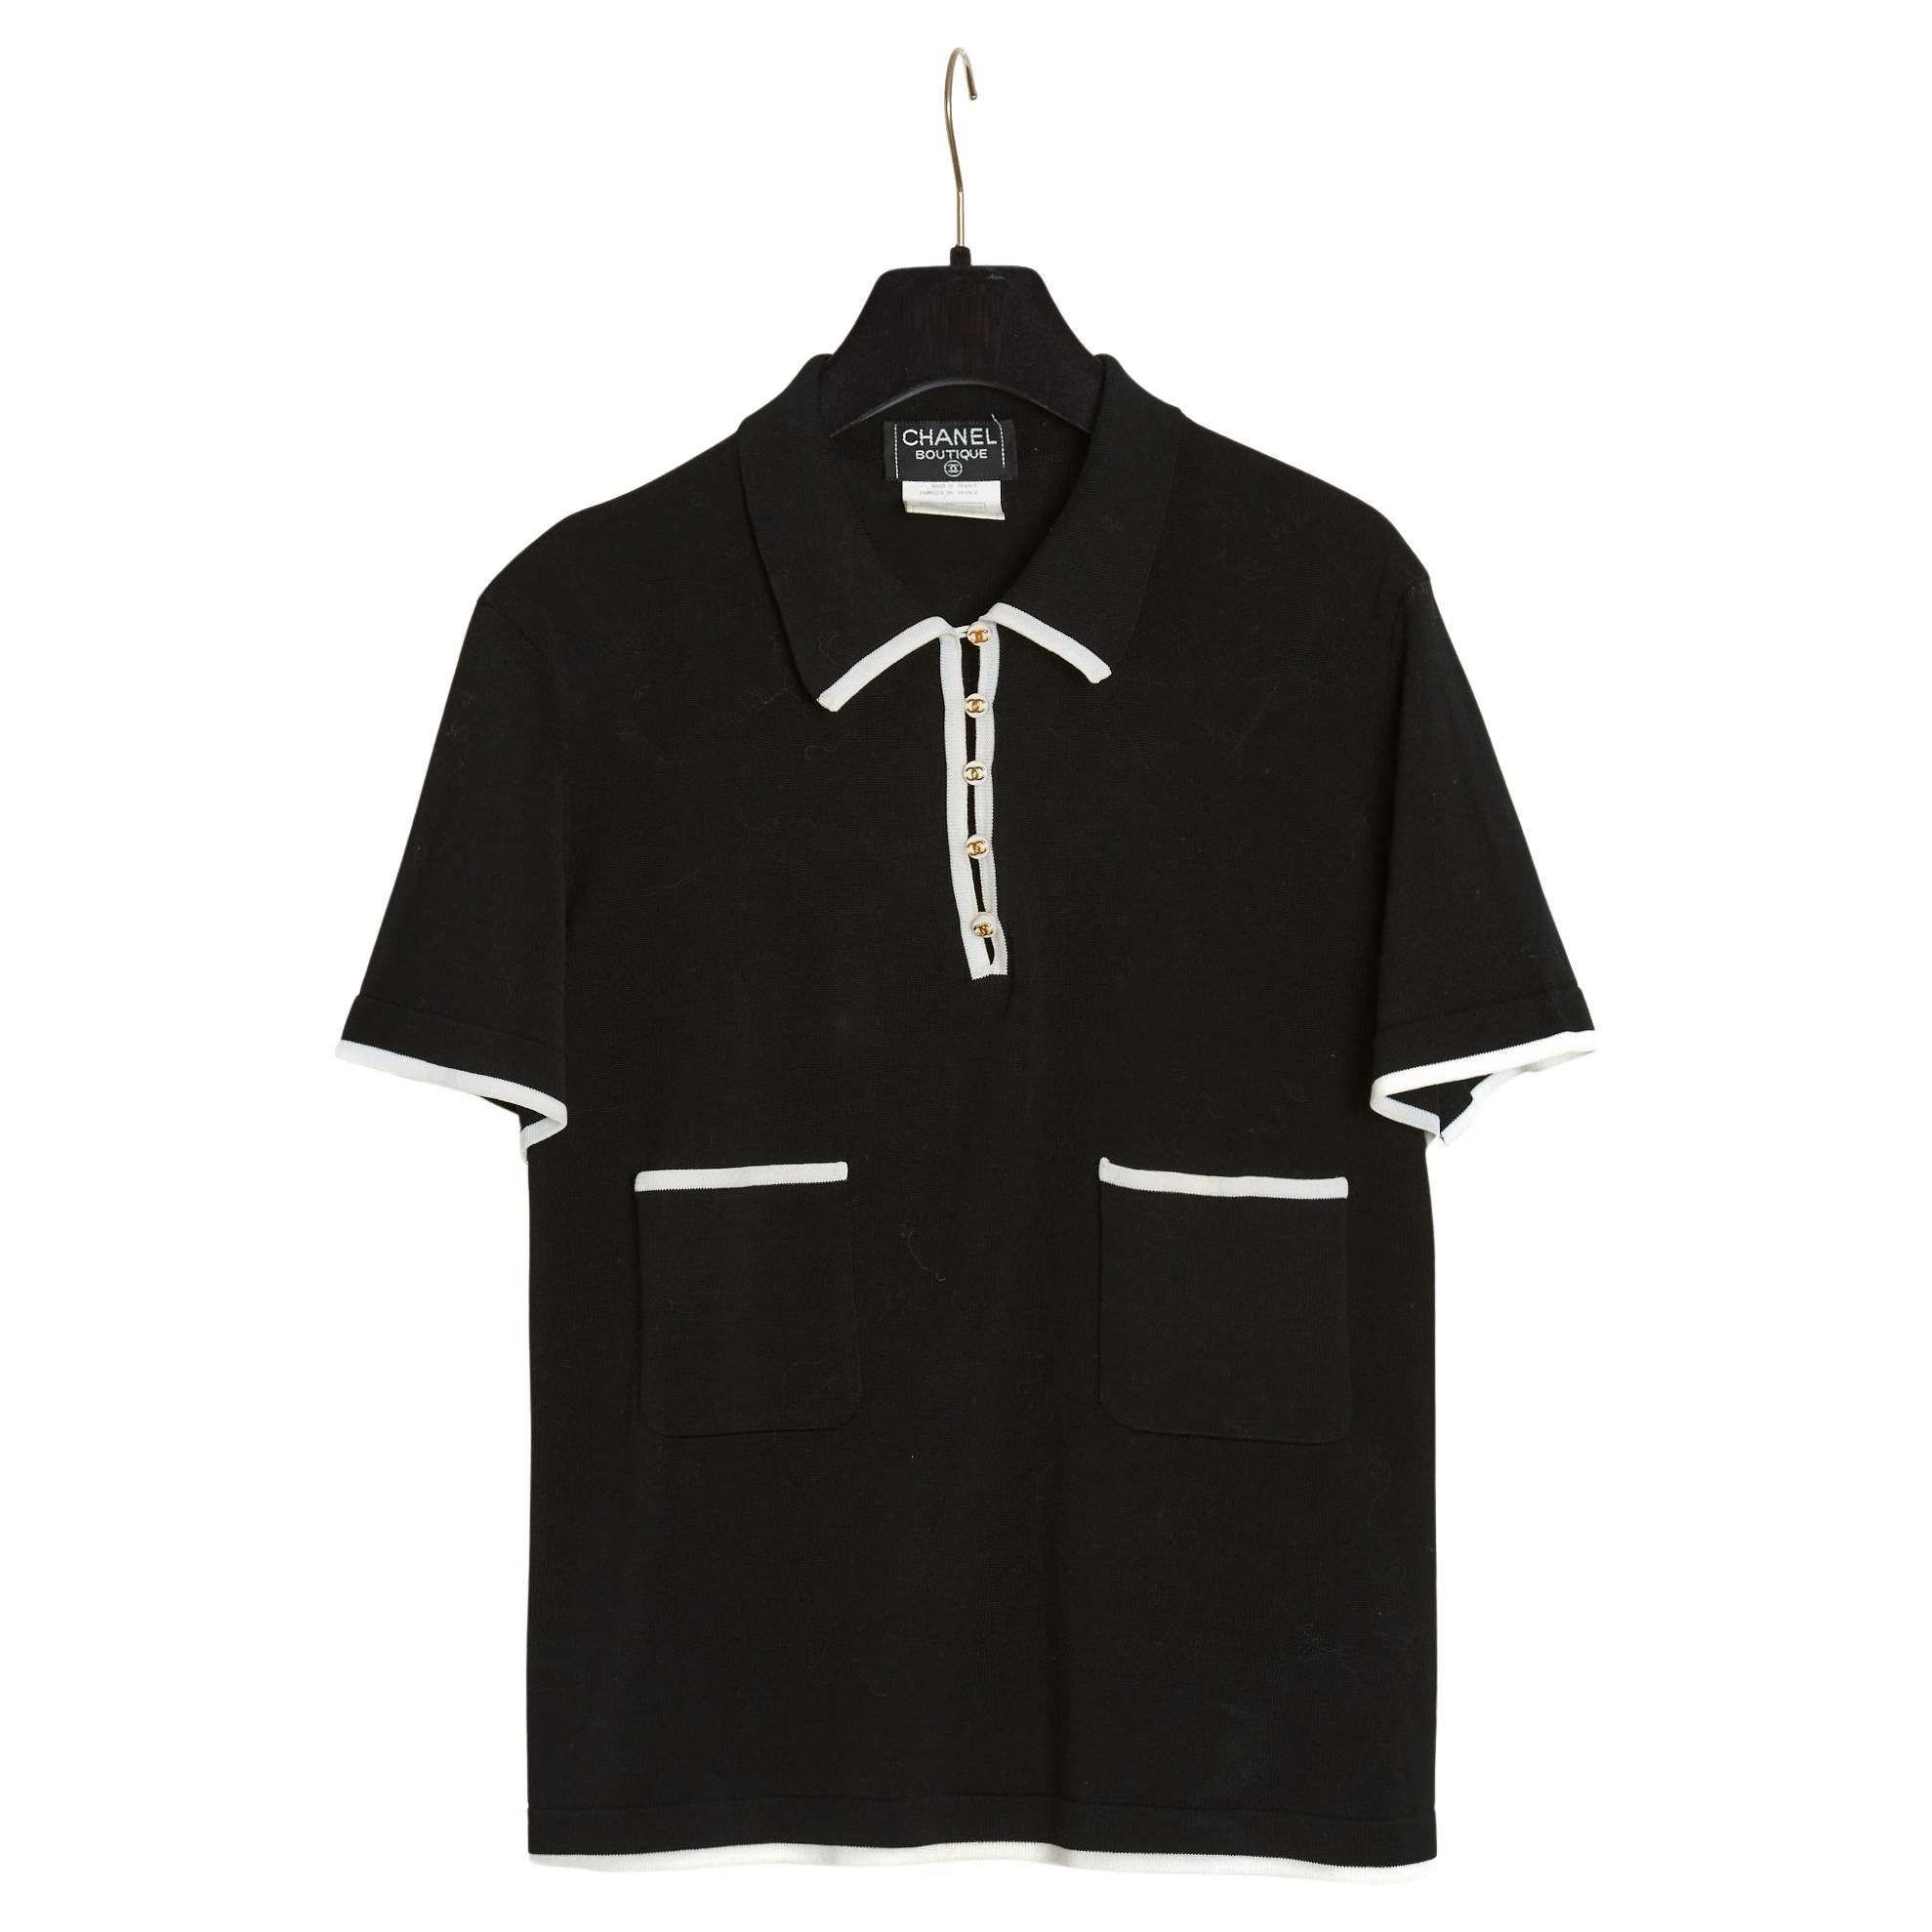 Cruise 1998 Chanel Polo Black White FR38 For Sale